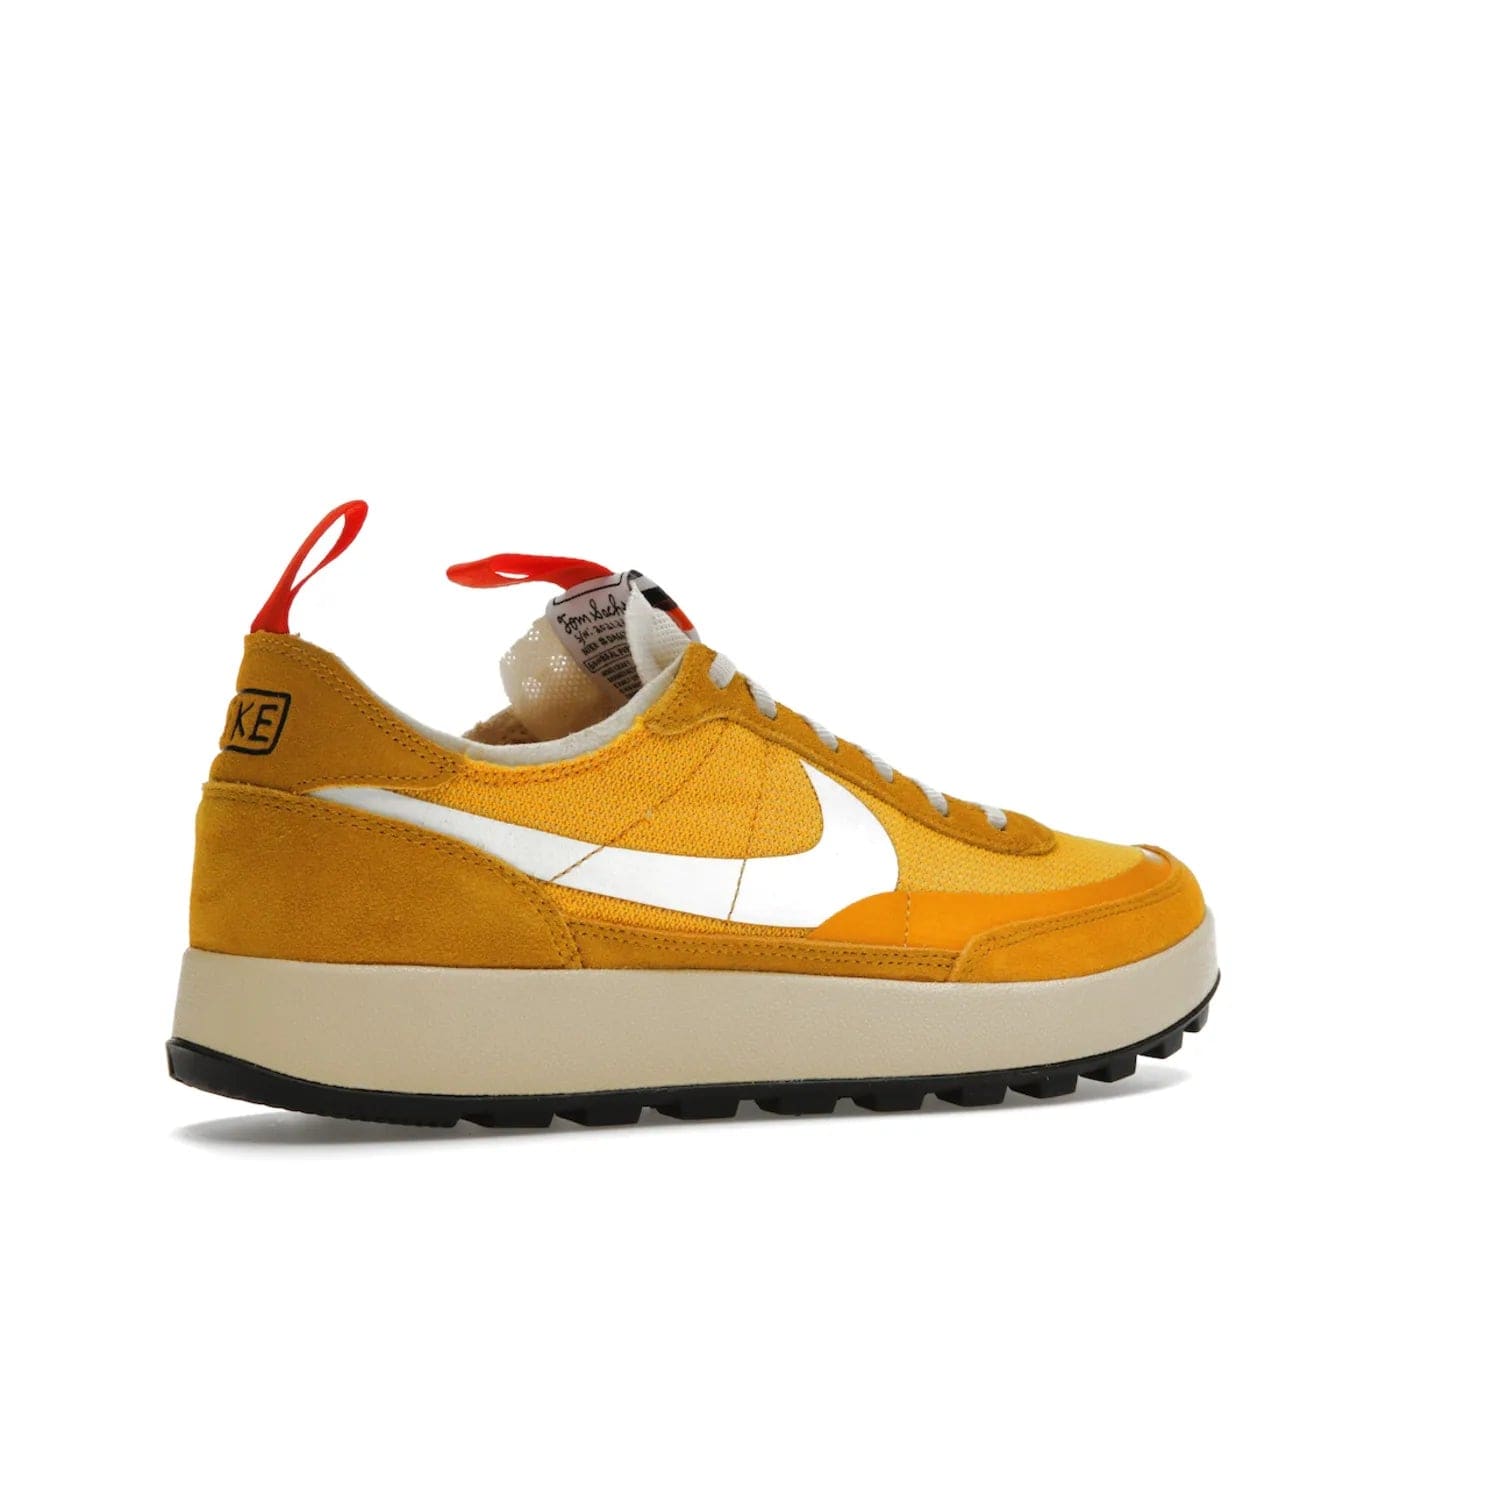 NikeCraft General Purpose Shoe Tom Sachs Archive Dark Sulfur - Image 34 - Only at www.BallersClubKickz.com - Collab between Nike & Tom Sachs. The NikeCraft General Purpose Shoe features dark sulfur mesh upper, suede overlays, contrasting white Swoosh and orange tabs. EVA cushioning & black waffle-traction rubber outsole ensures performance. Stylish & perfect for any occasion, the shoe released September 2, 2022.